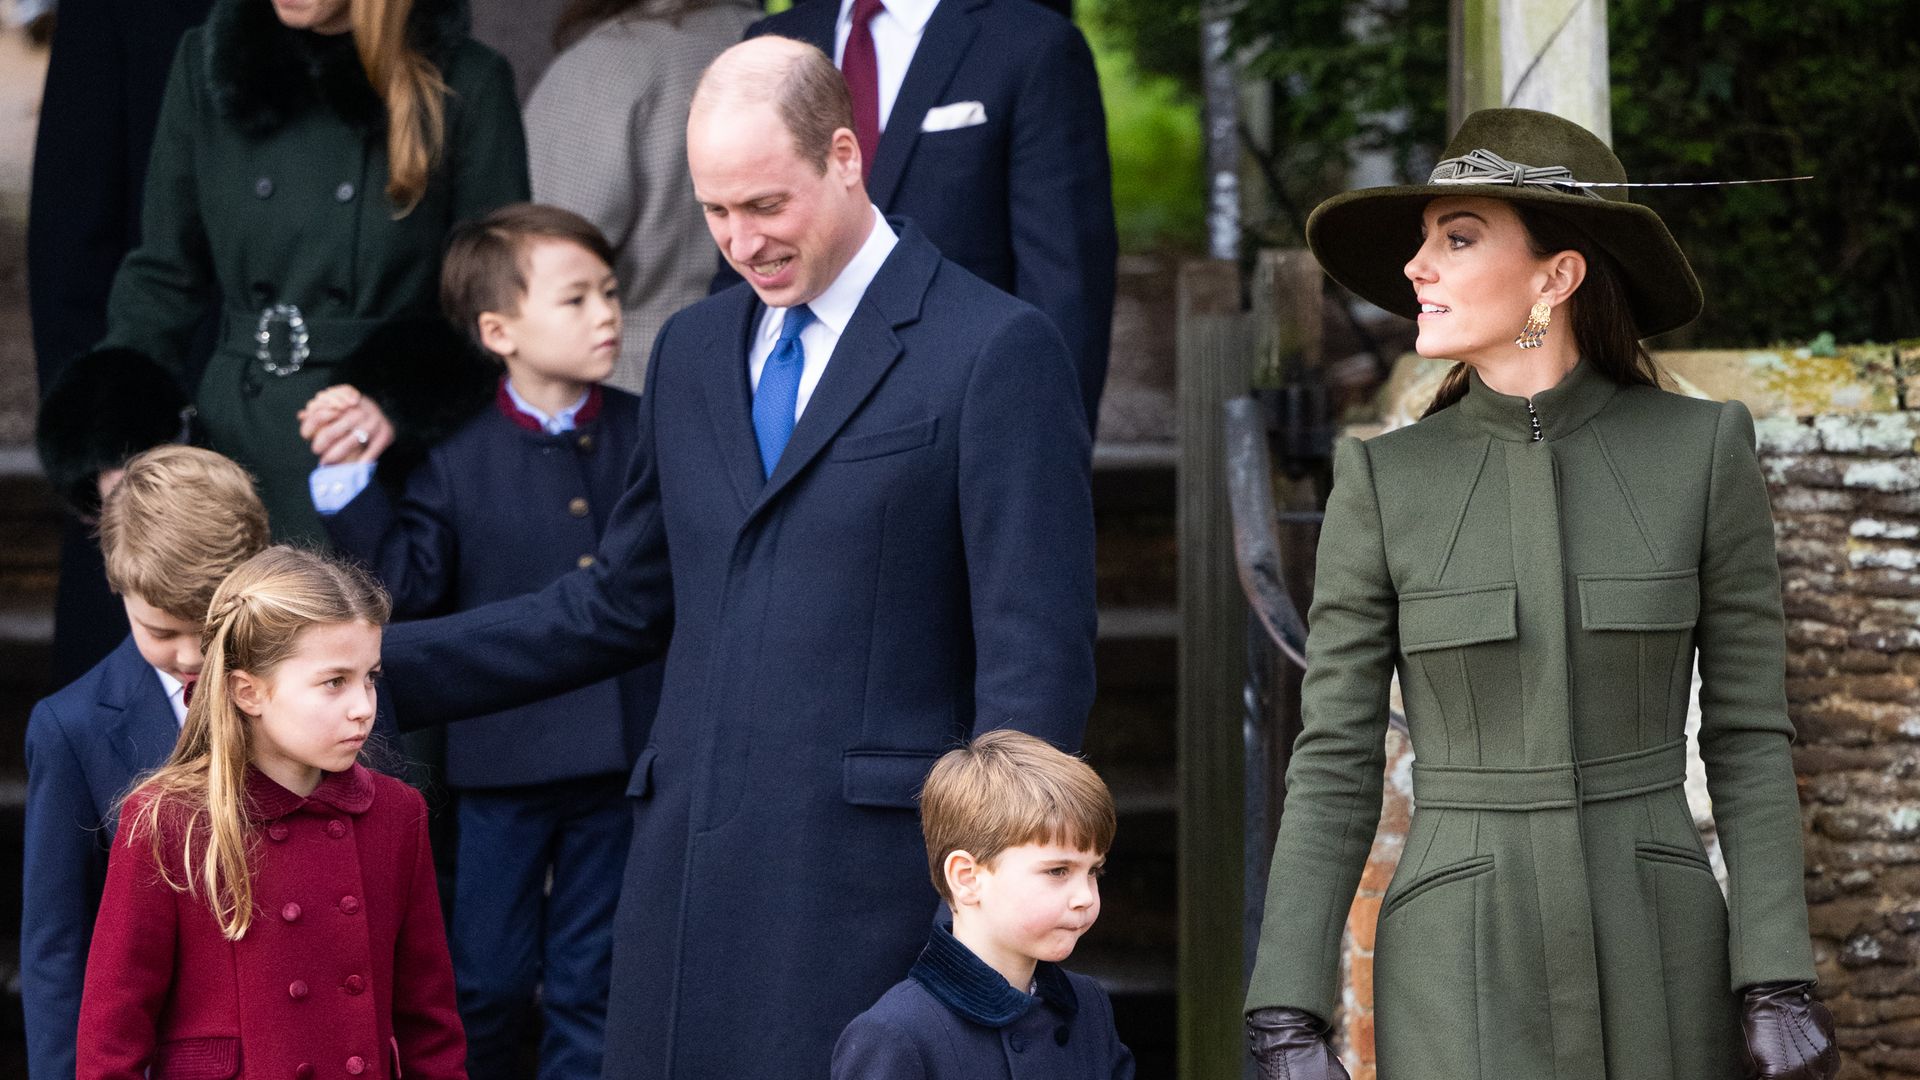 Prince George, Princess Charlotte, Prince William, Prince Louis and Kate at church